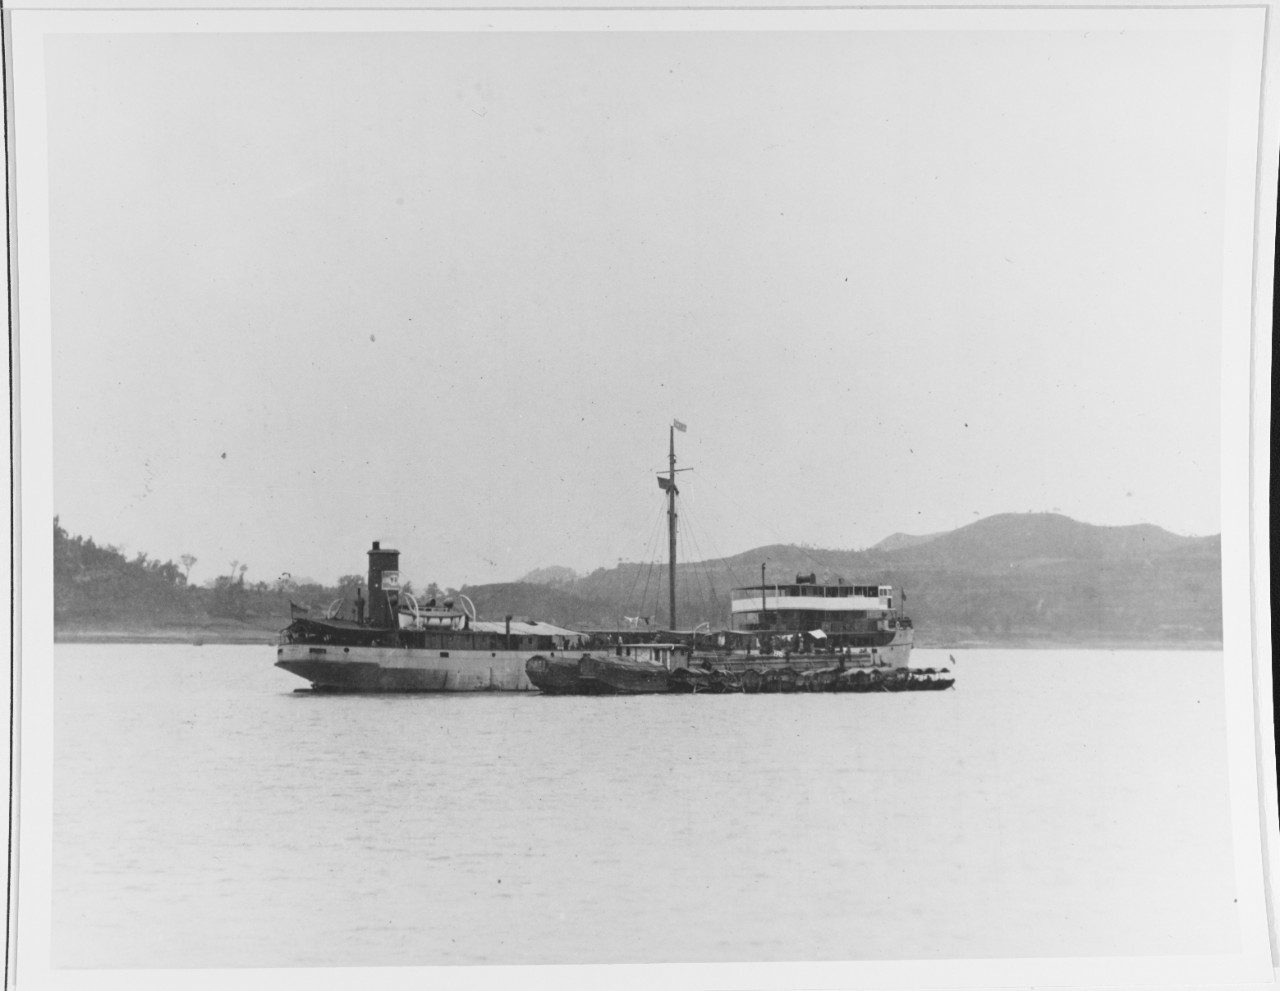 The motorvessel IFUNG